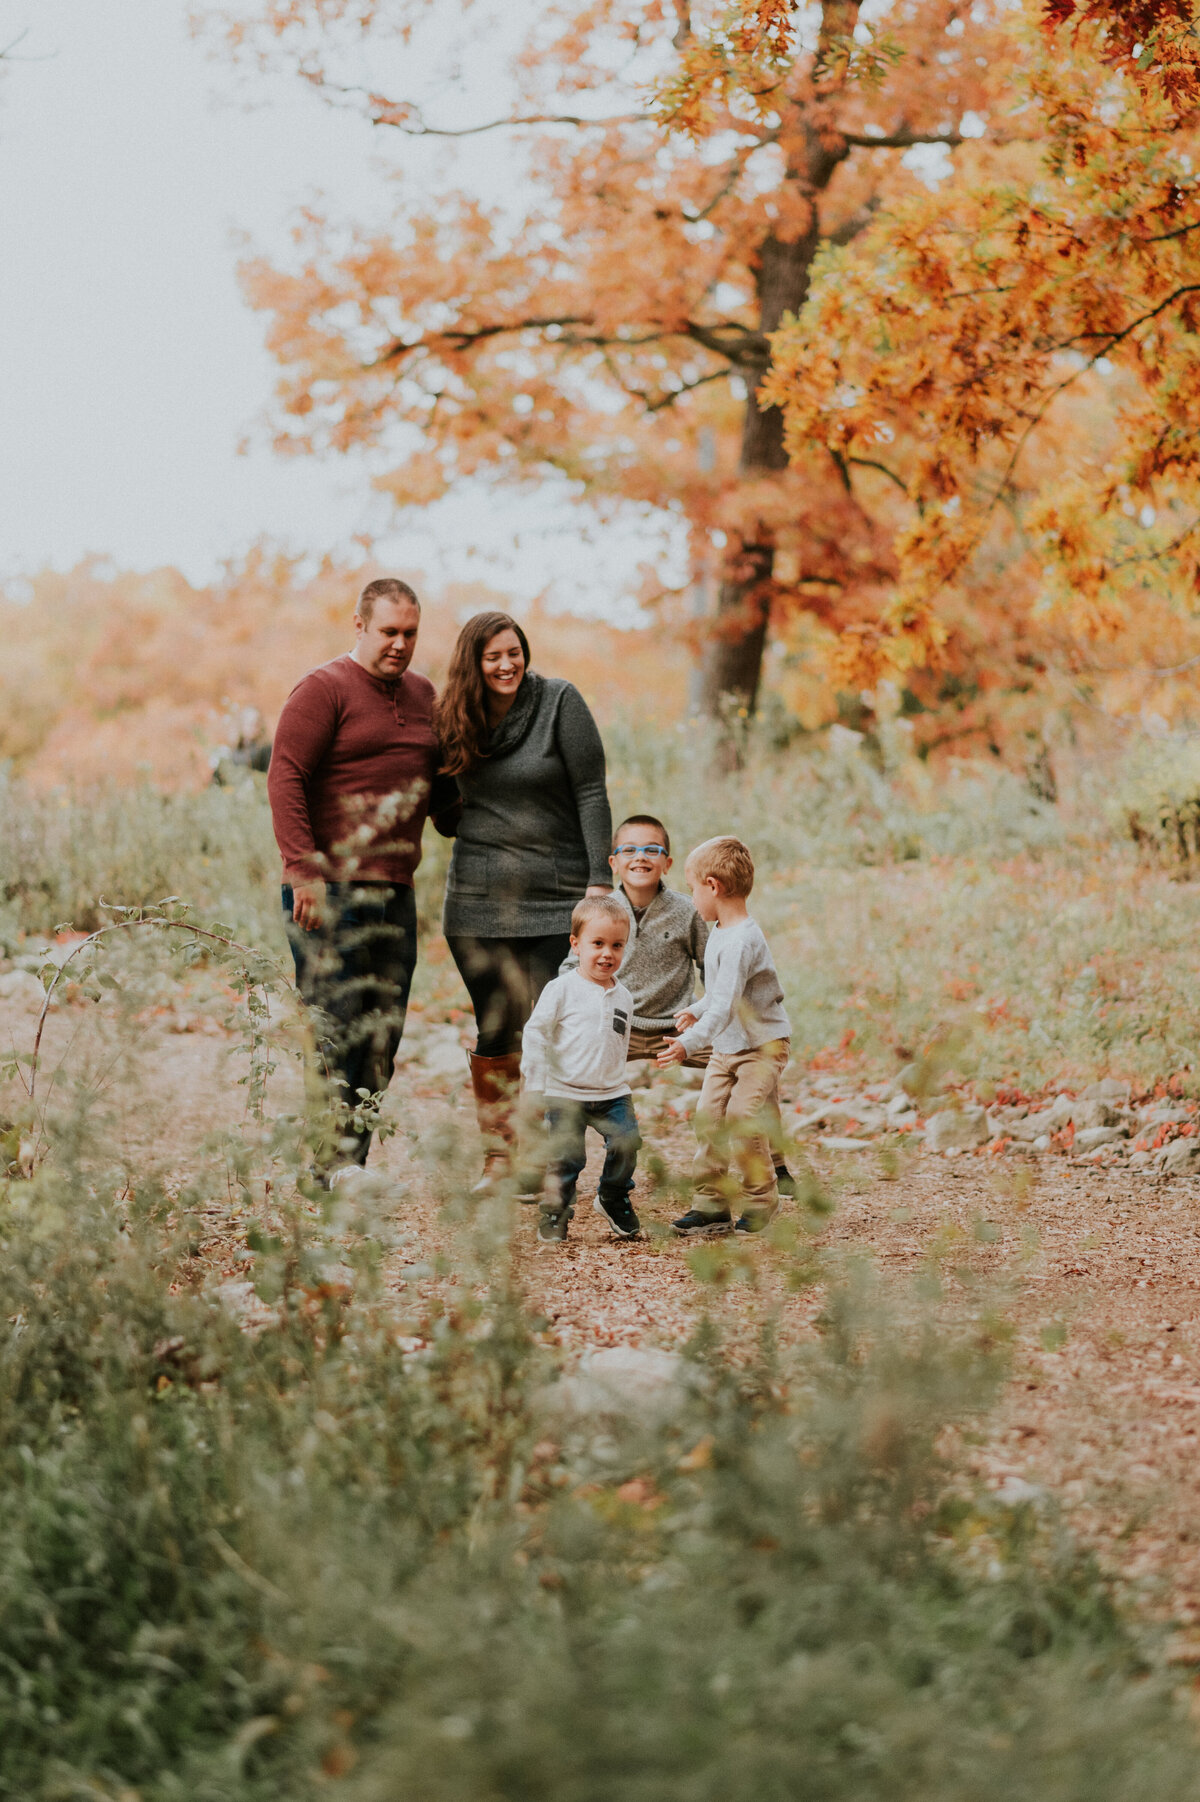 Embark on autumn adventures in your family photos in St. Paul and Minneapolis. Shannon Kathleen Photography captures your joy amidst the vibrant hues of fall. Book now for autumn memories.